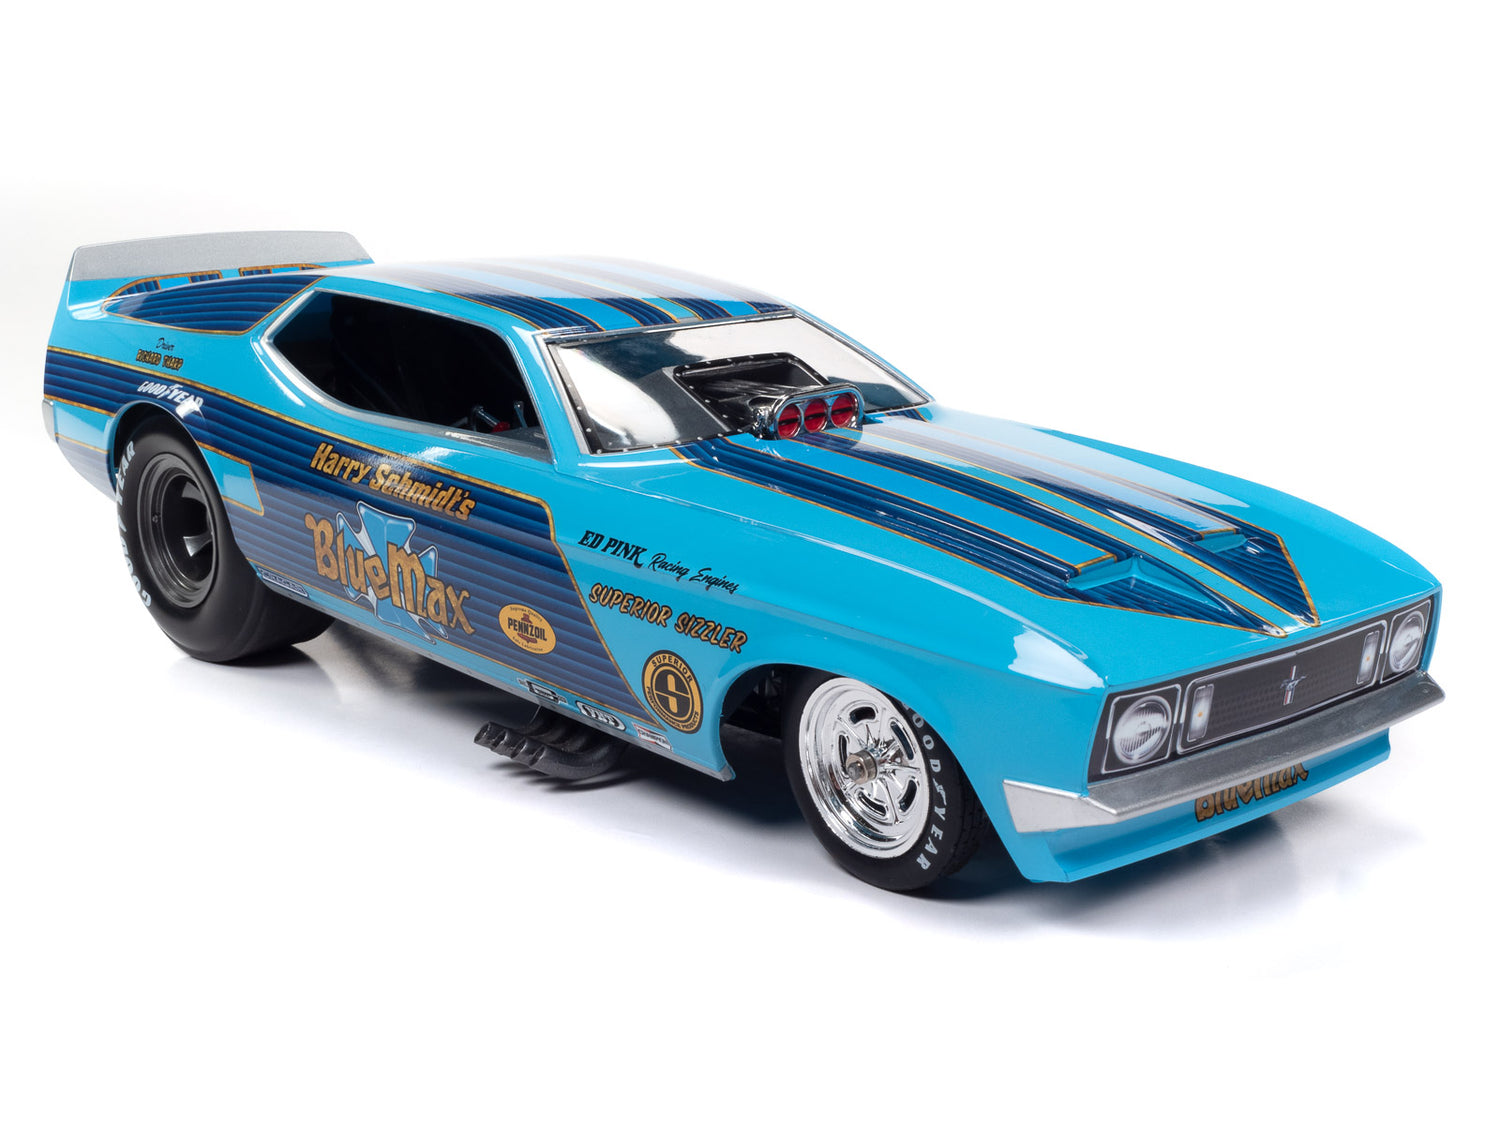 Auto World Blue Max 1973 Ford Mustang Funny Car (Legends of the Quarter Mile) 1:18 Scale Diecast